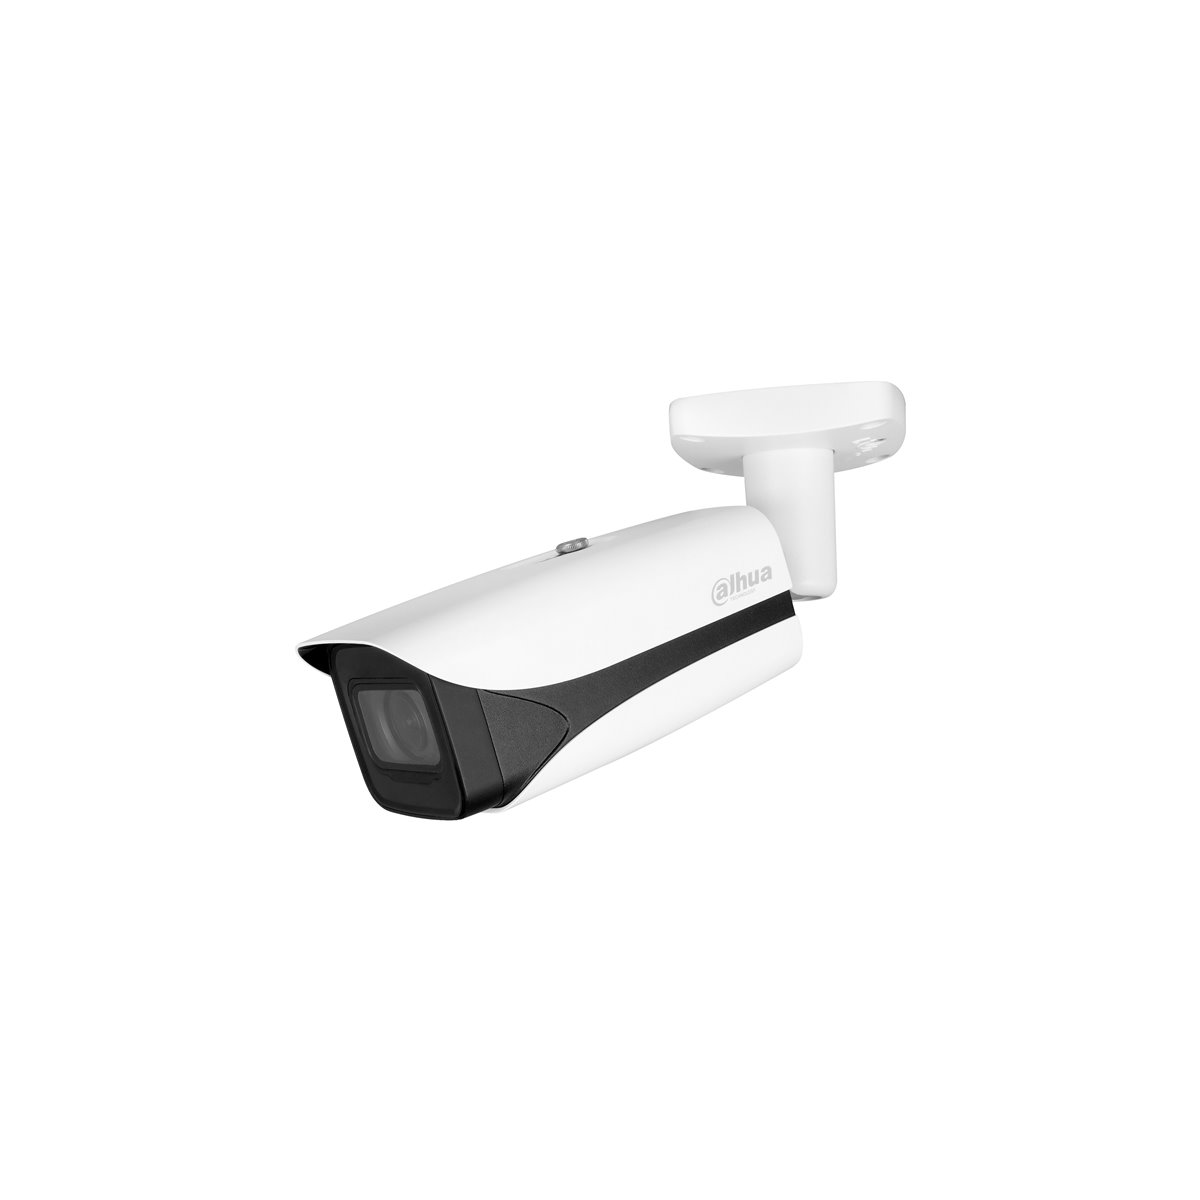 Dahua Technology Pro IPC-HFW5442E-ZE-2712 - IP security camera - Outdoor - Wired - Ceiling-wall - White - Bullet